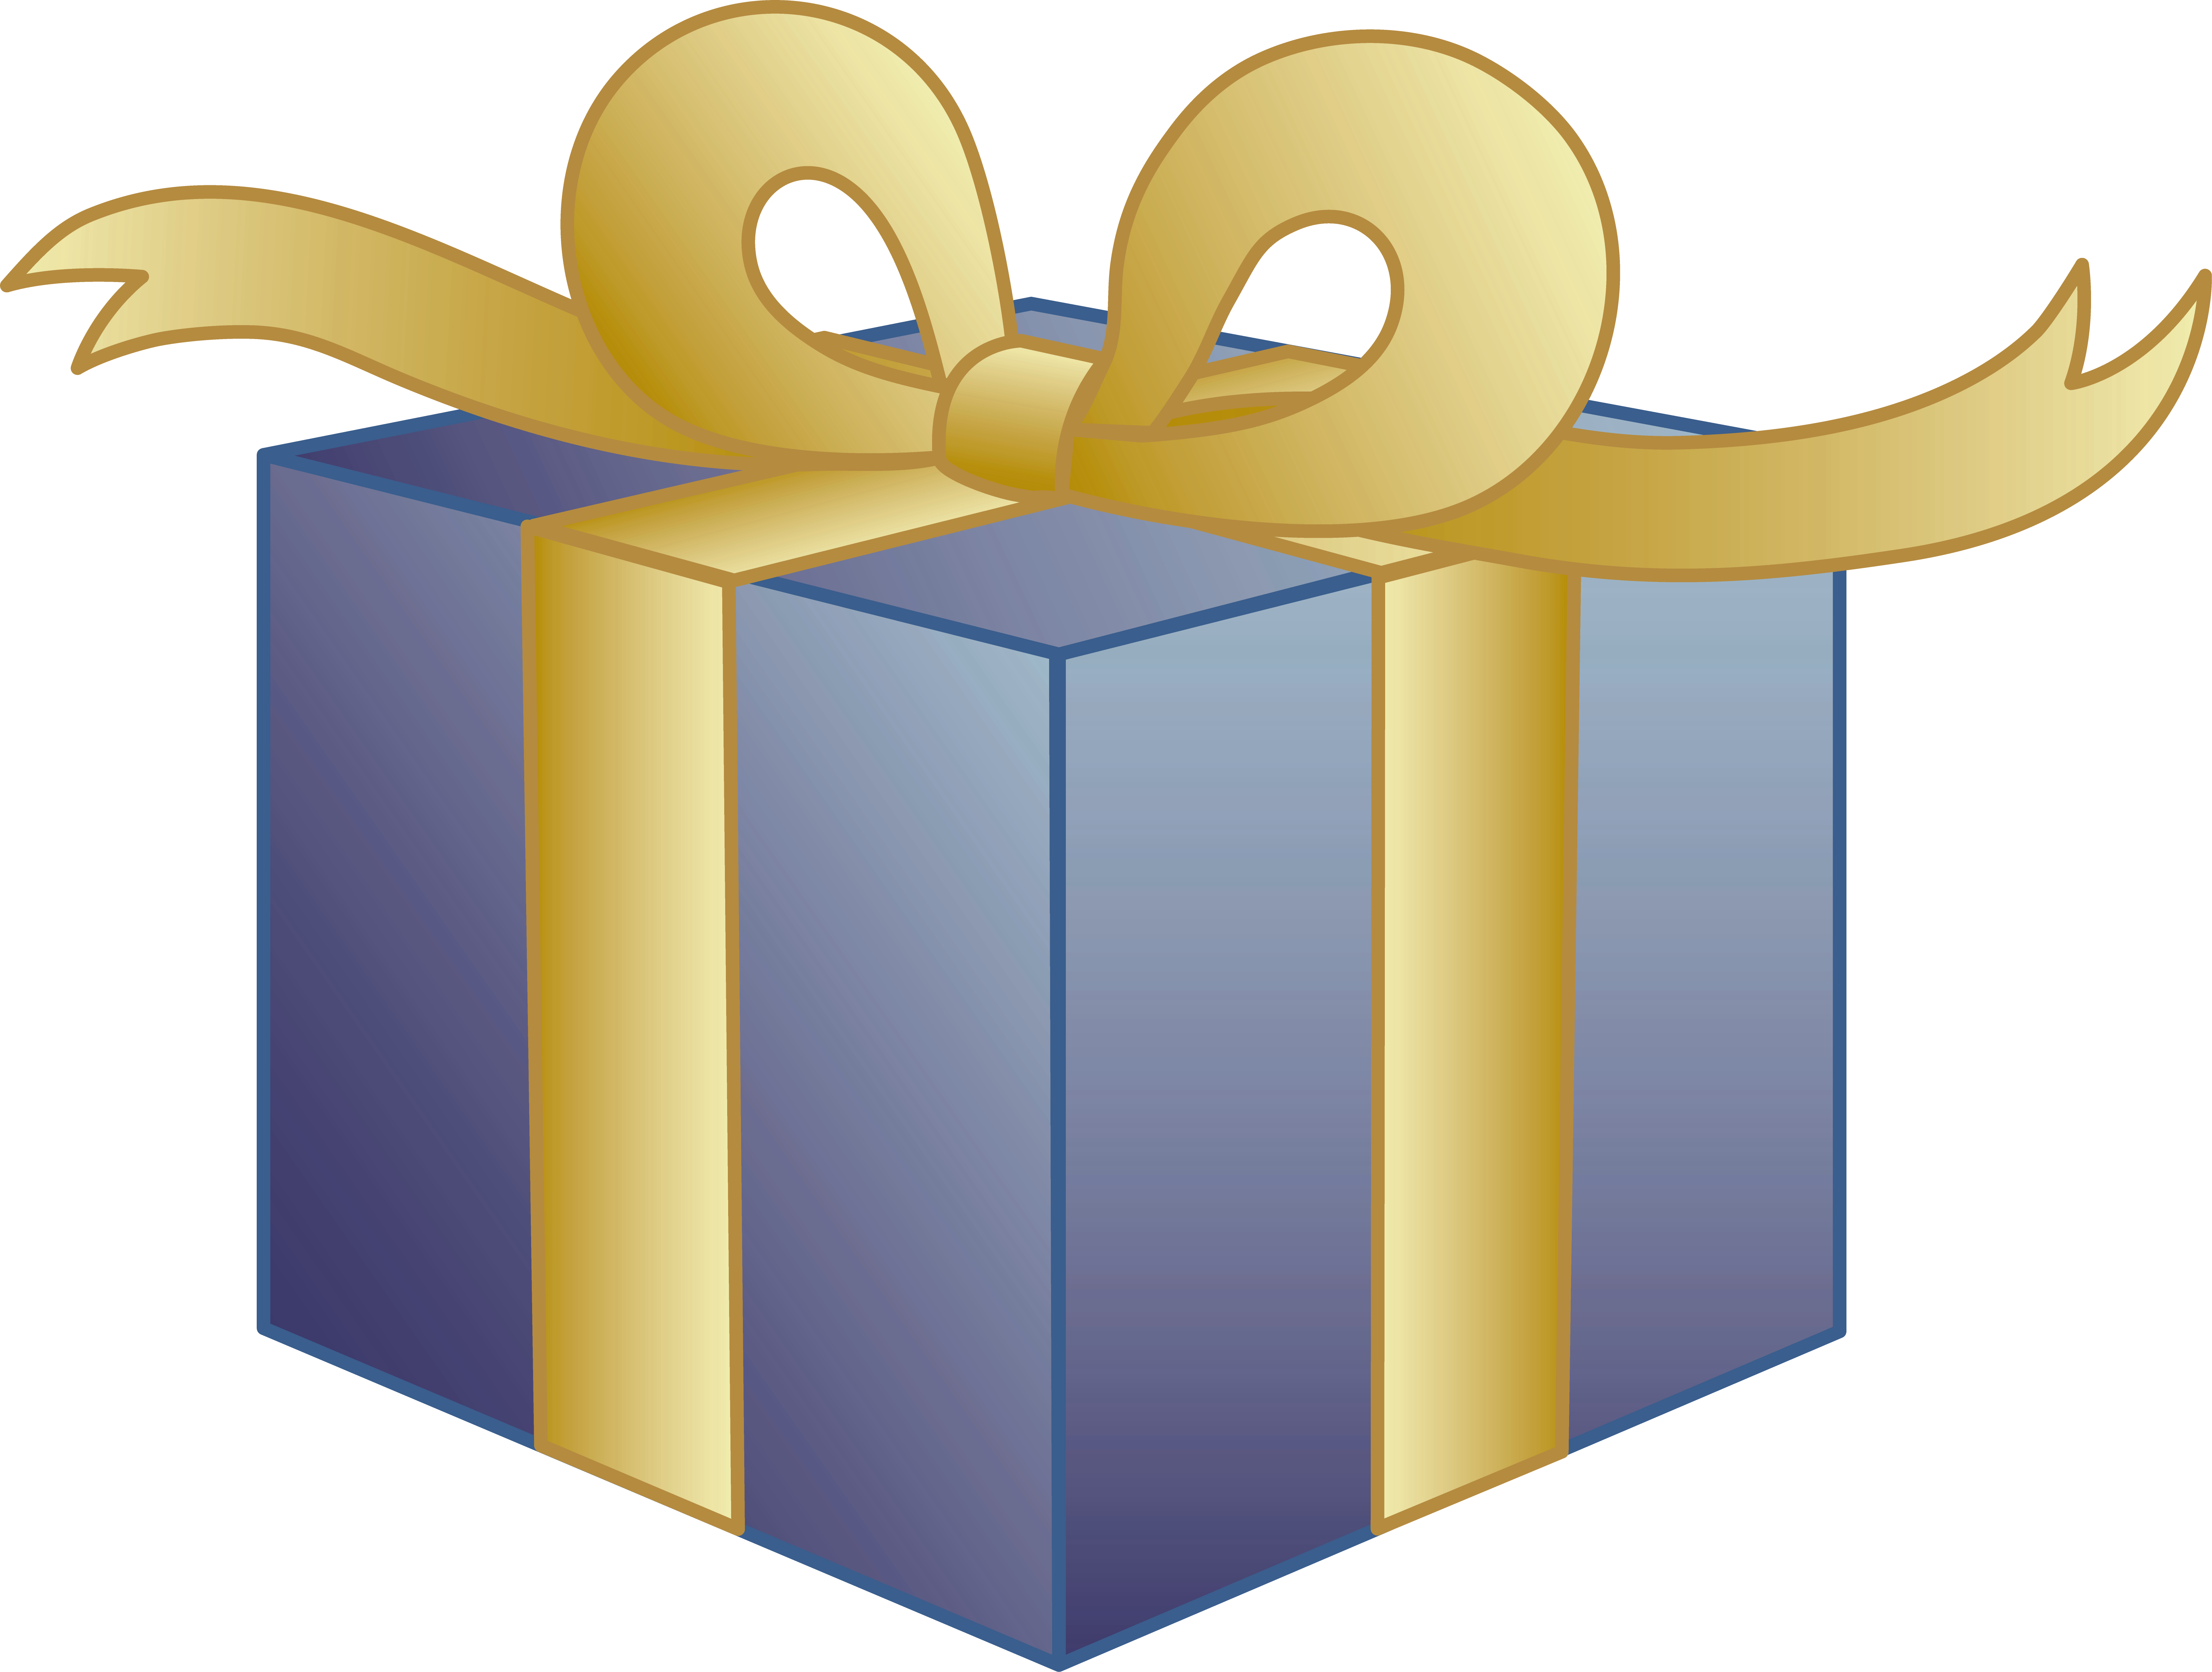 Free Wrapped Presents, Download Free Clip Art, Free Clip Art.